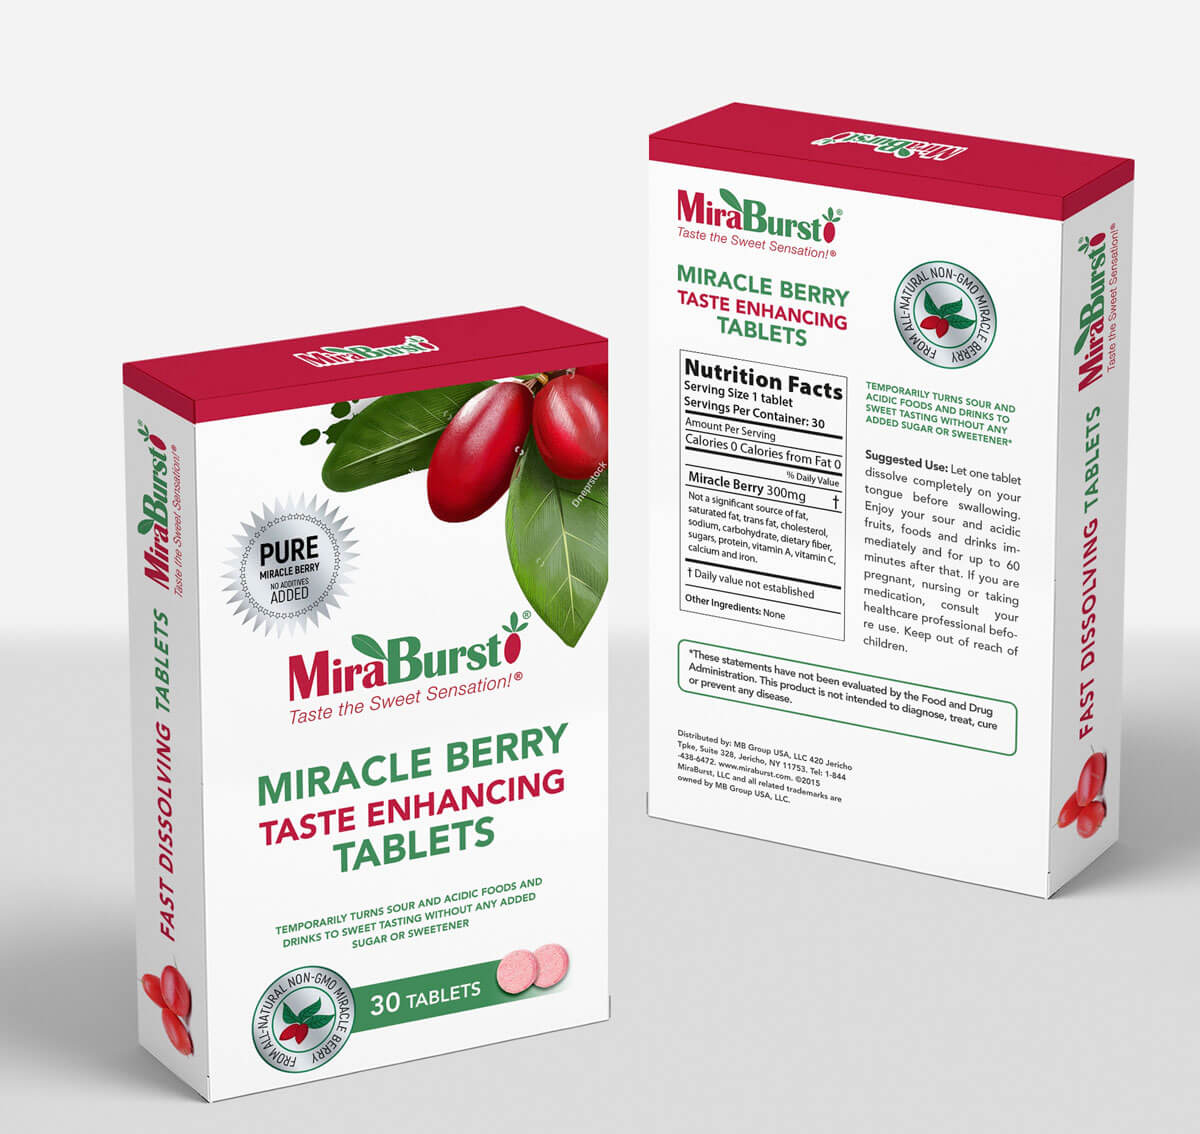 the MiraBurst Miracle berry Tablets in a box